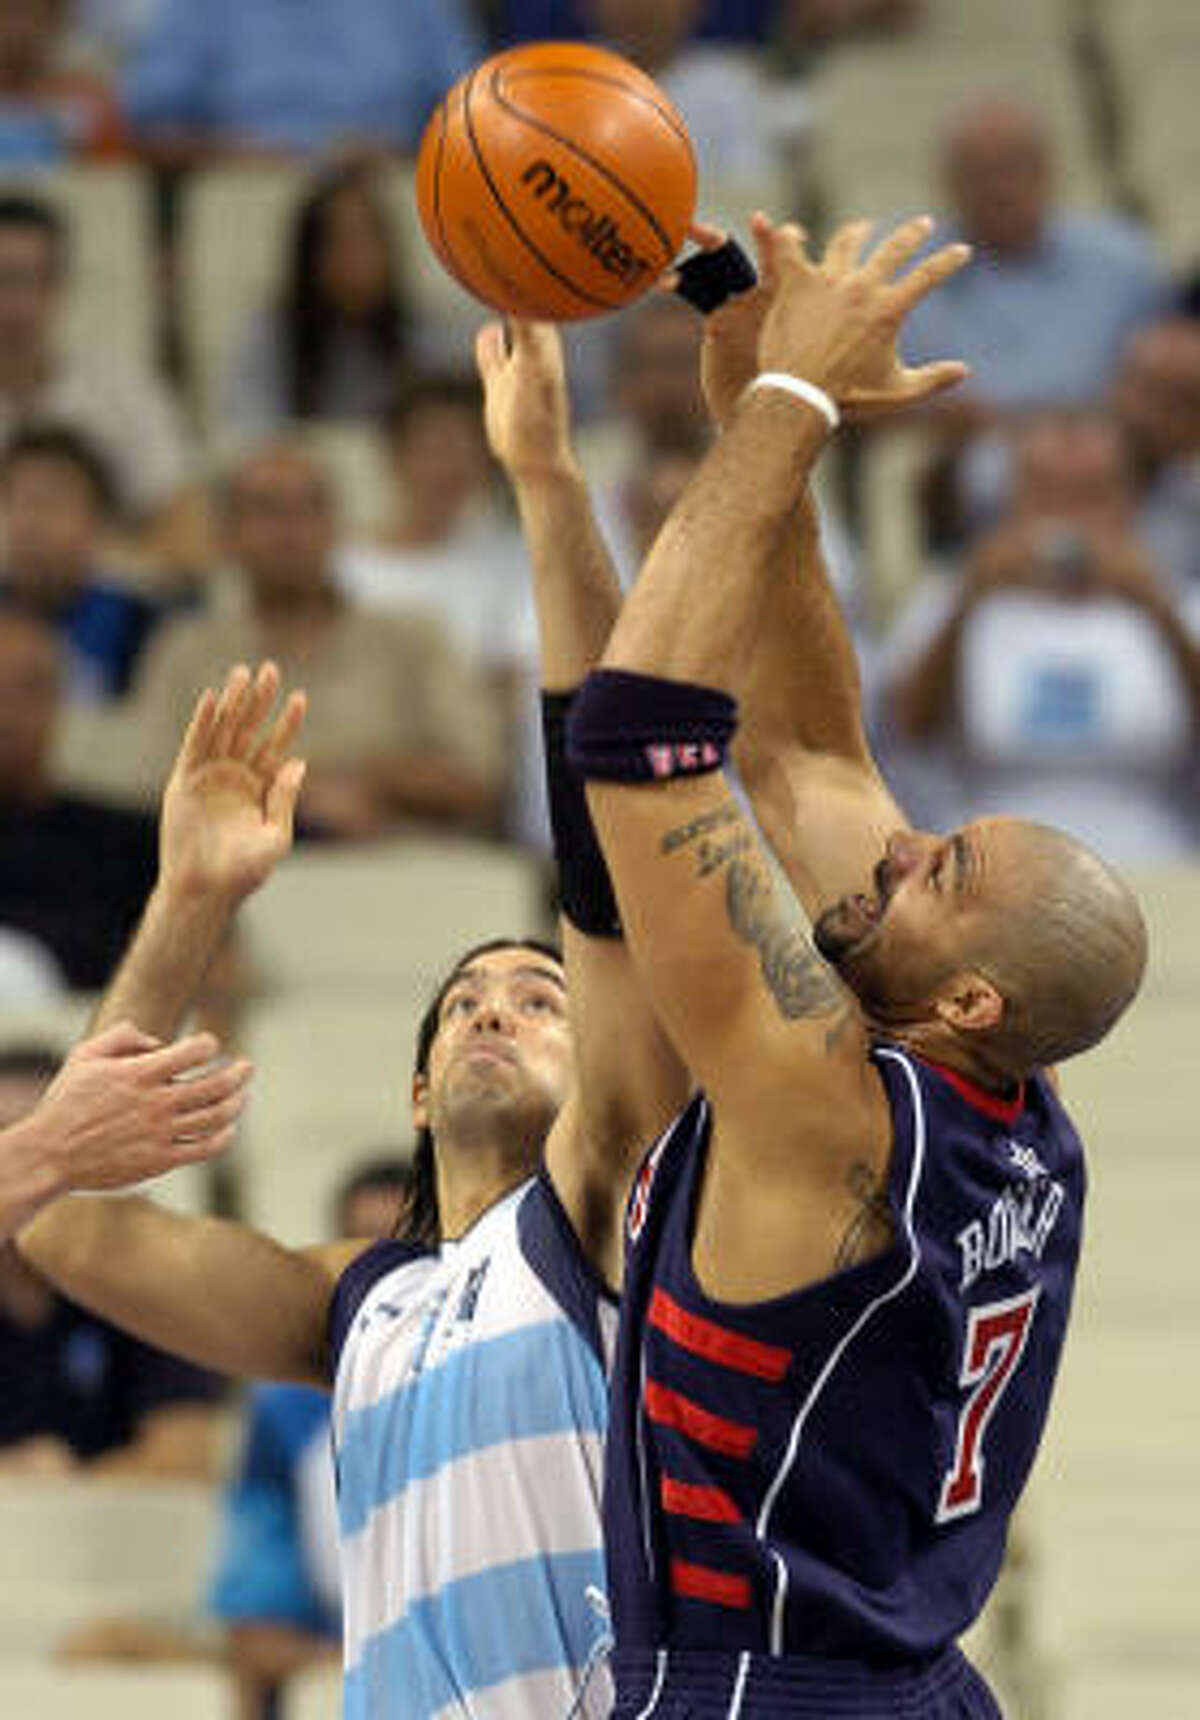 Argentina's Luis Scola has gone toe-to-toe with NBA stars like Carlos Boozer in international play.